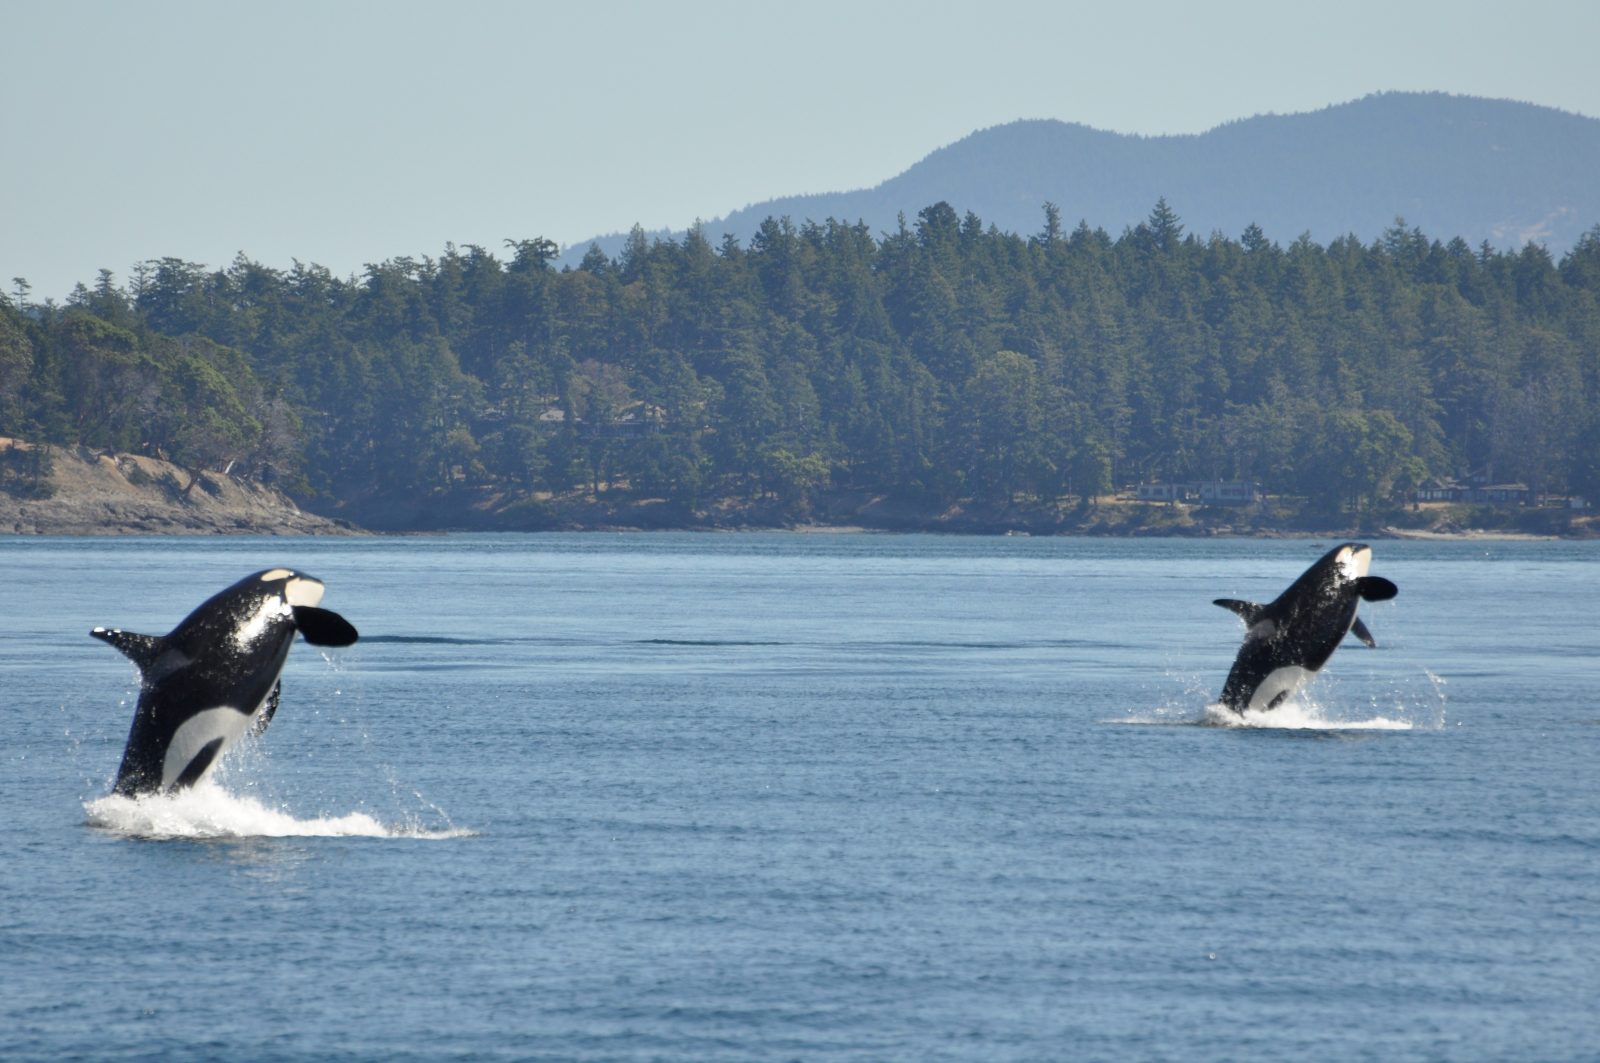 Two orcas jump out of the water at the same time.